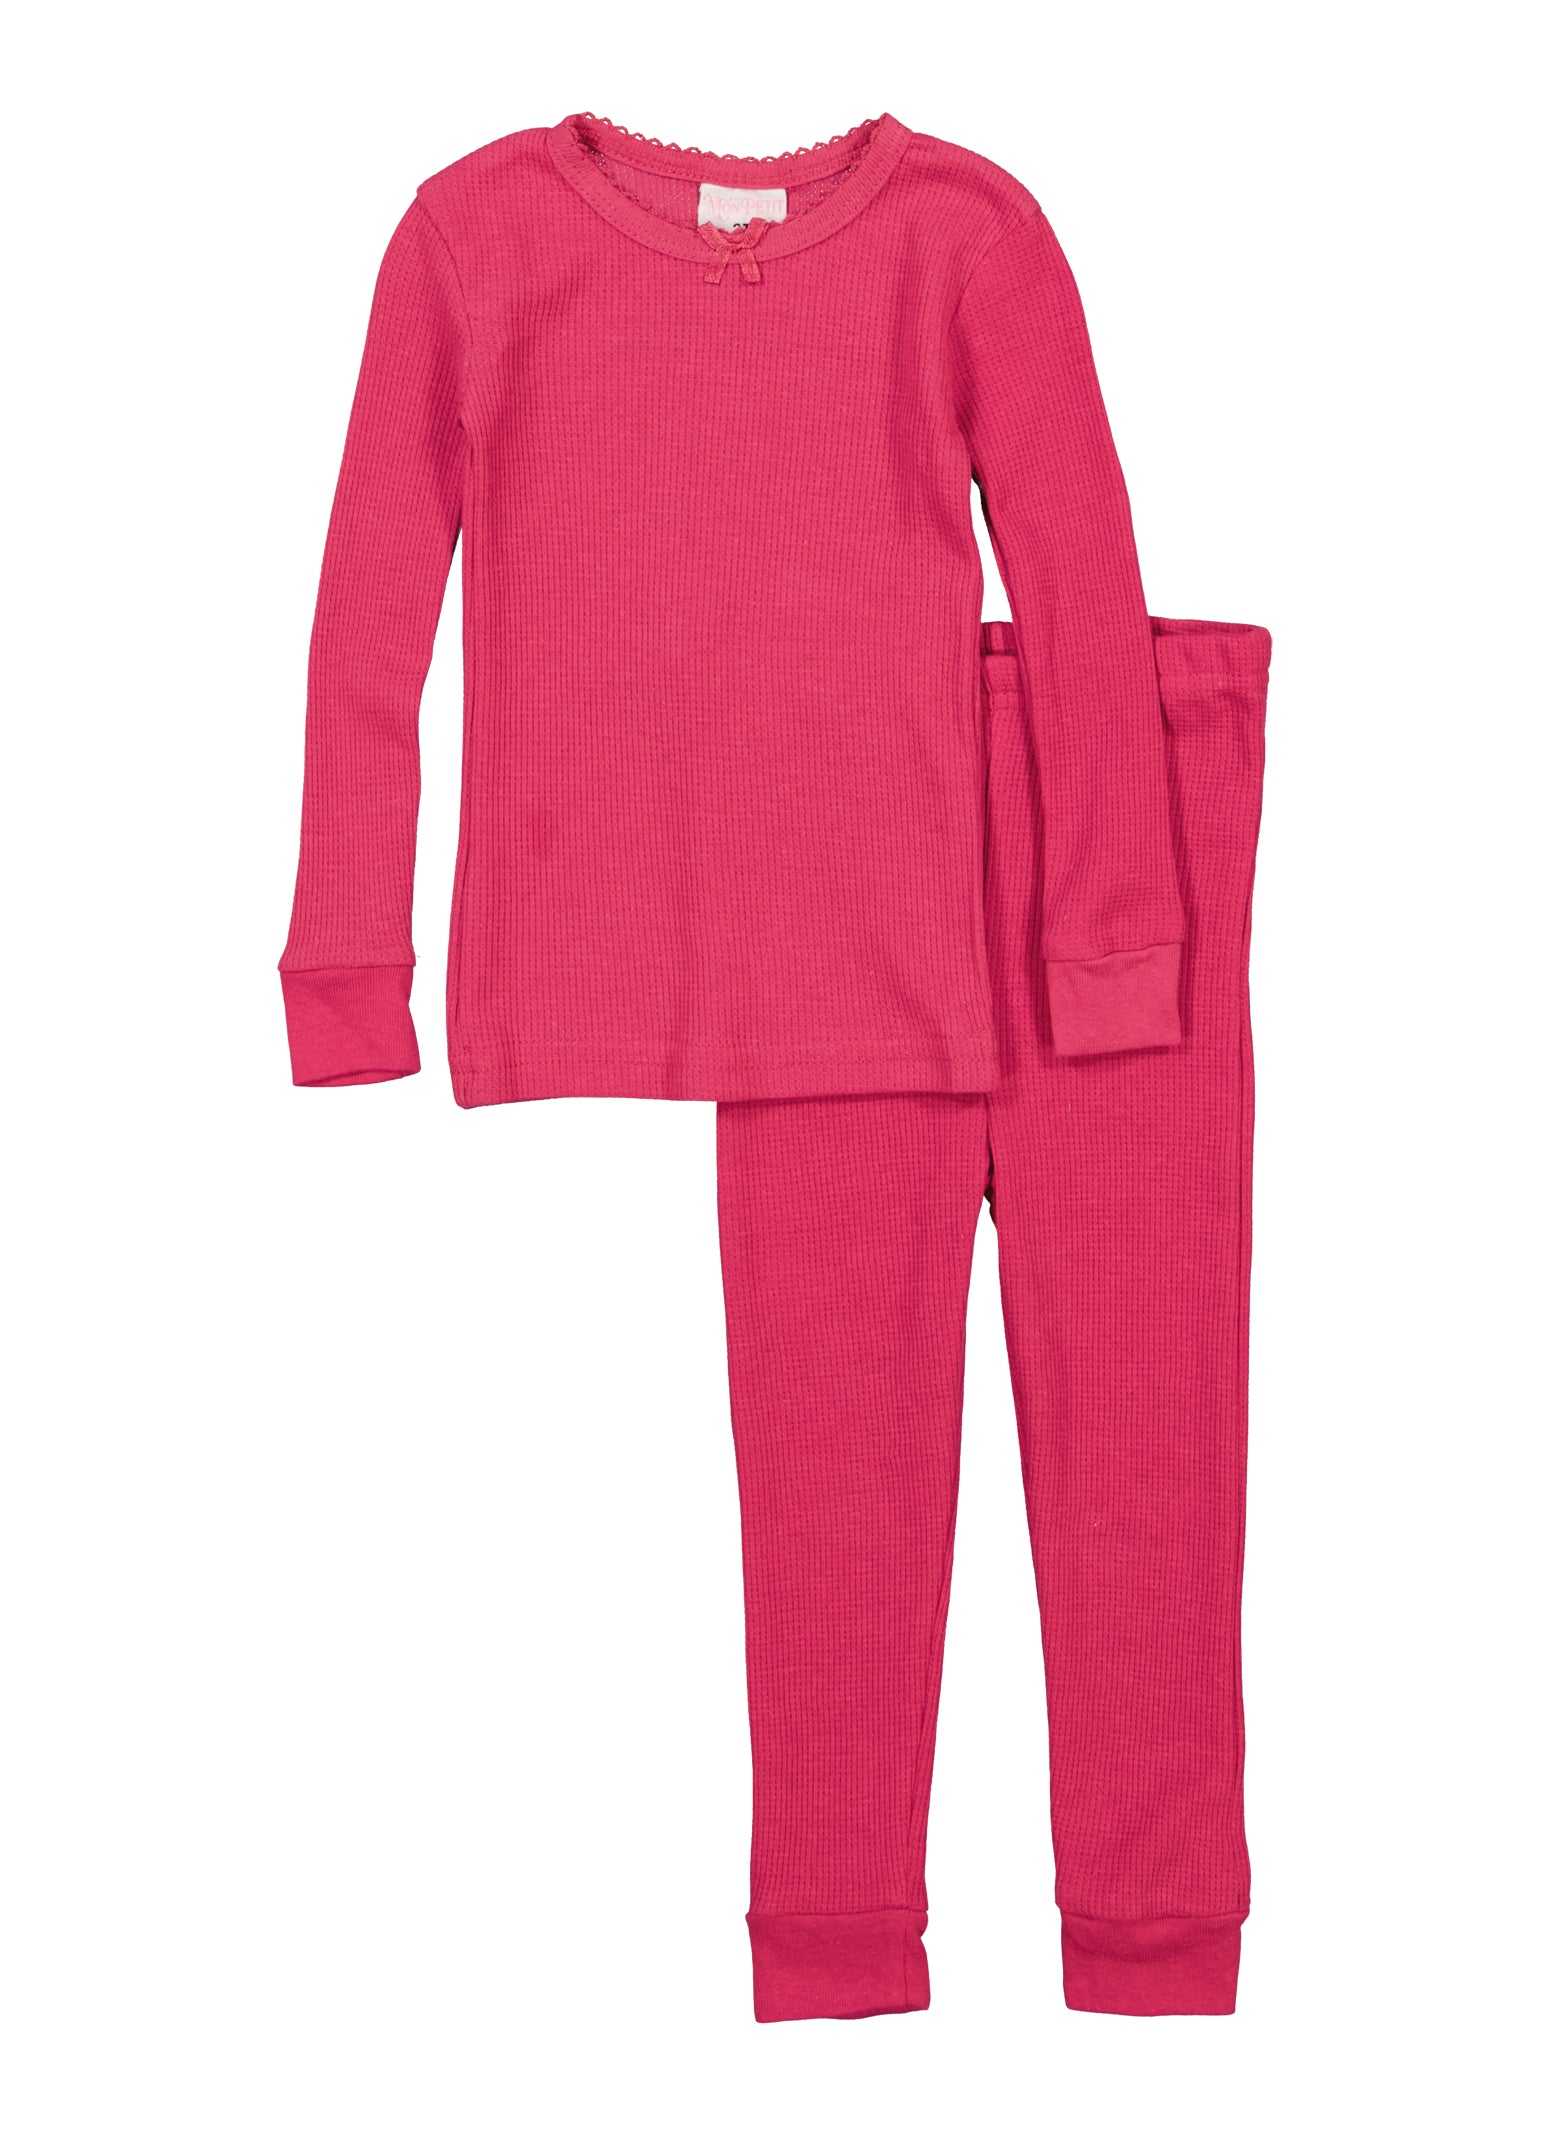 Toddler Girls Solid Thermal Top and Pants